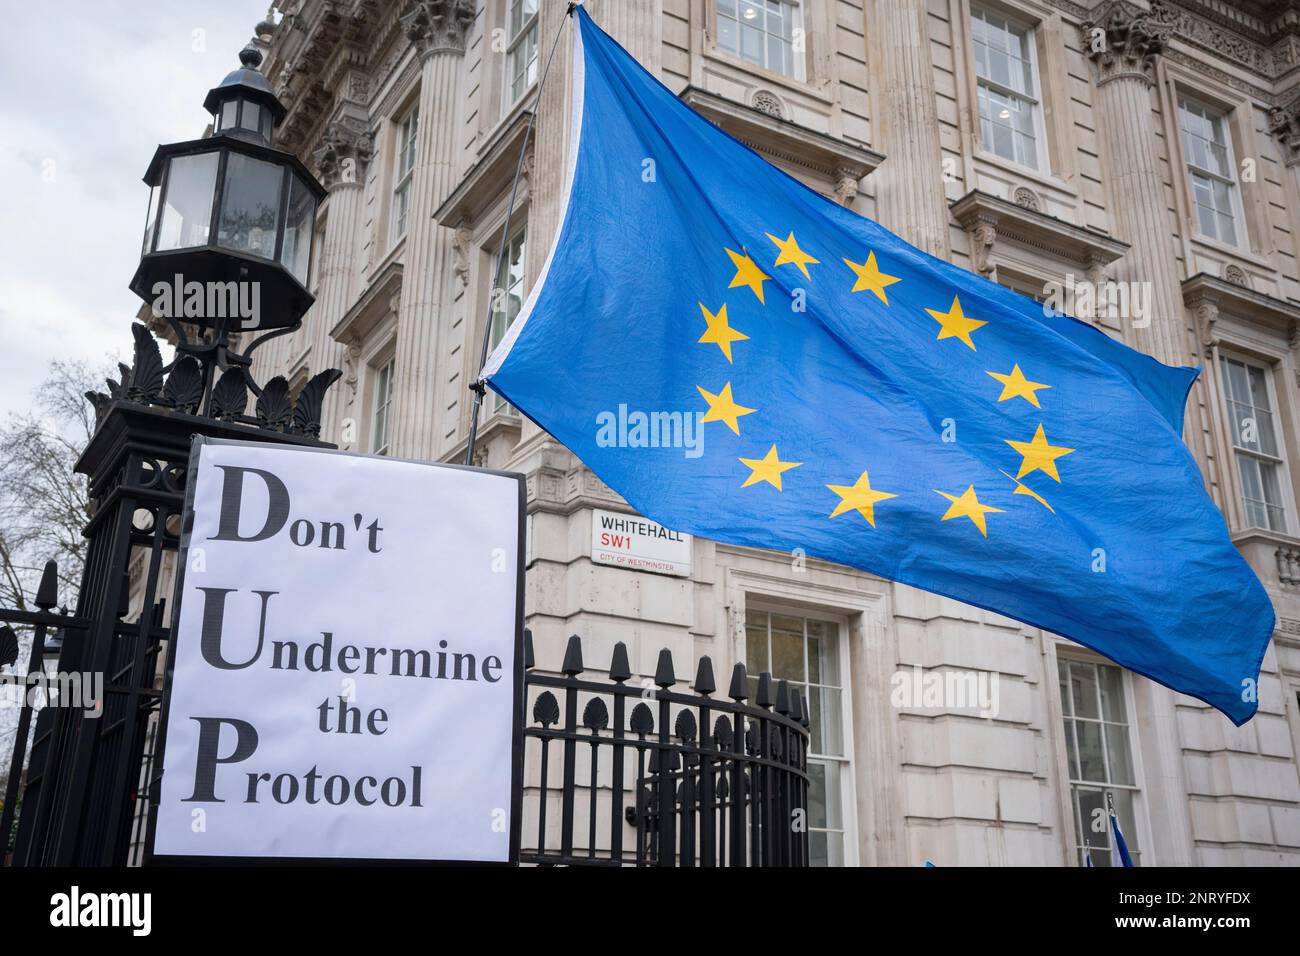 On the day that British Prime Minister Rushi Sunak's government finally reached a post-Brexit trade deal with the EU, a renegotiation of the Northern Irish Protocol, the EU flag flies above pro-Europe protesters at the gates to Downing Street, on 27th February 2023, in London, England. Stock Photo